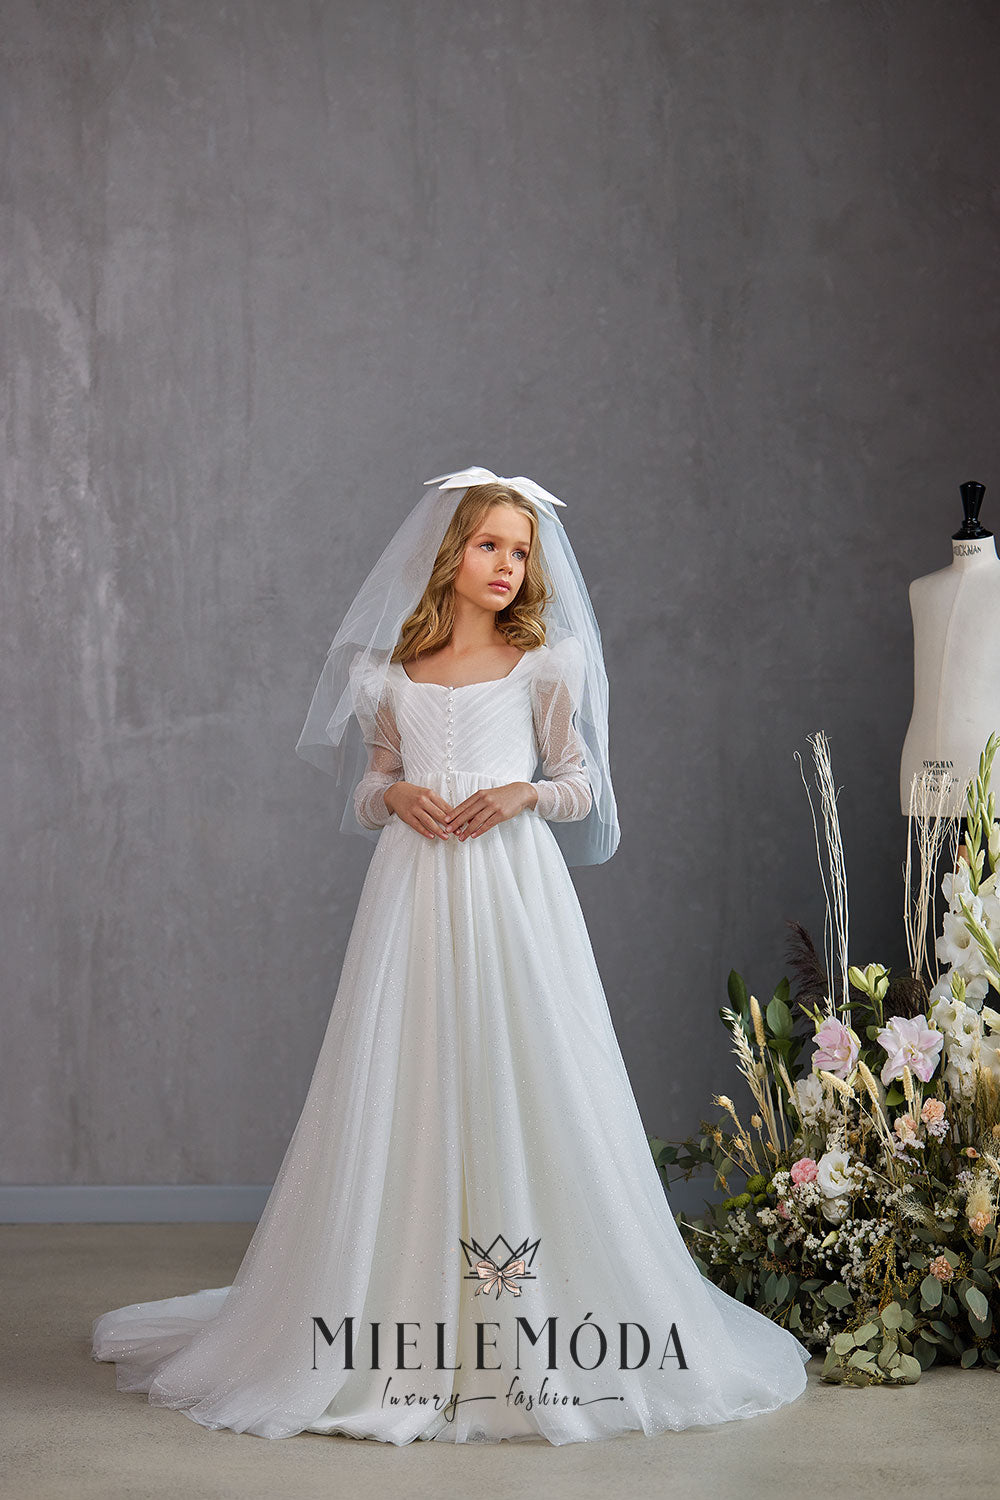 First Communion Luxury Tulle Veil with Bow